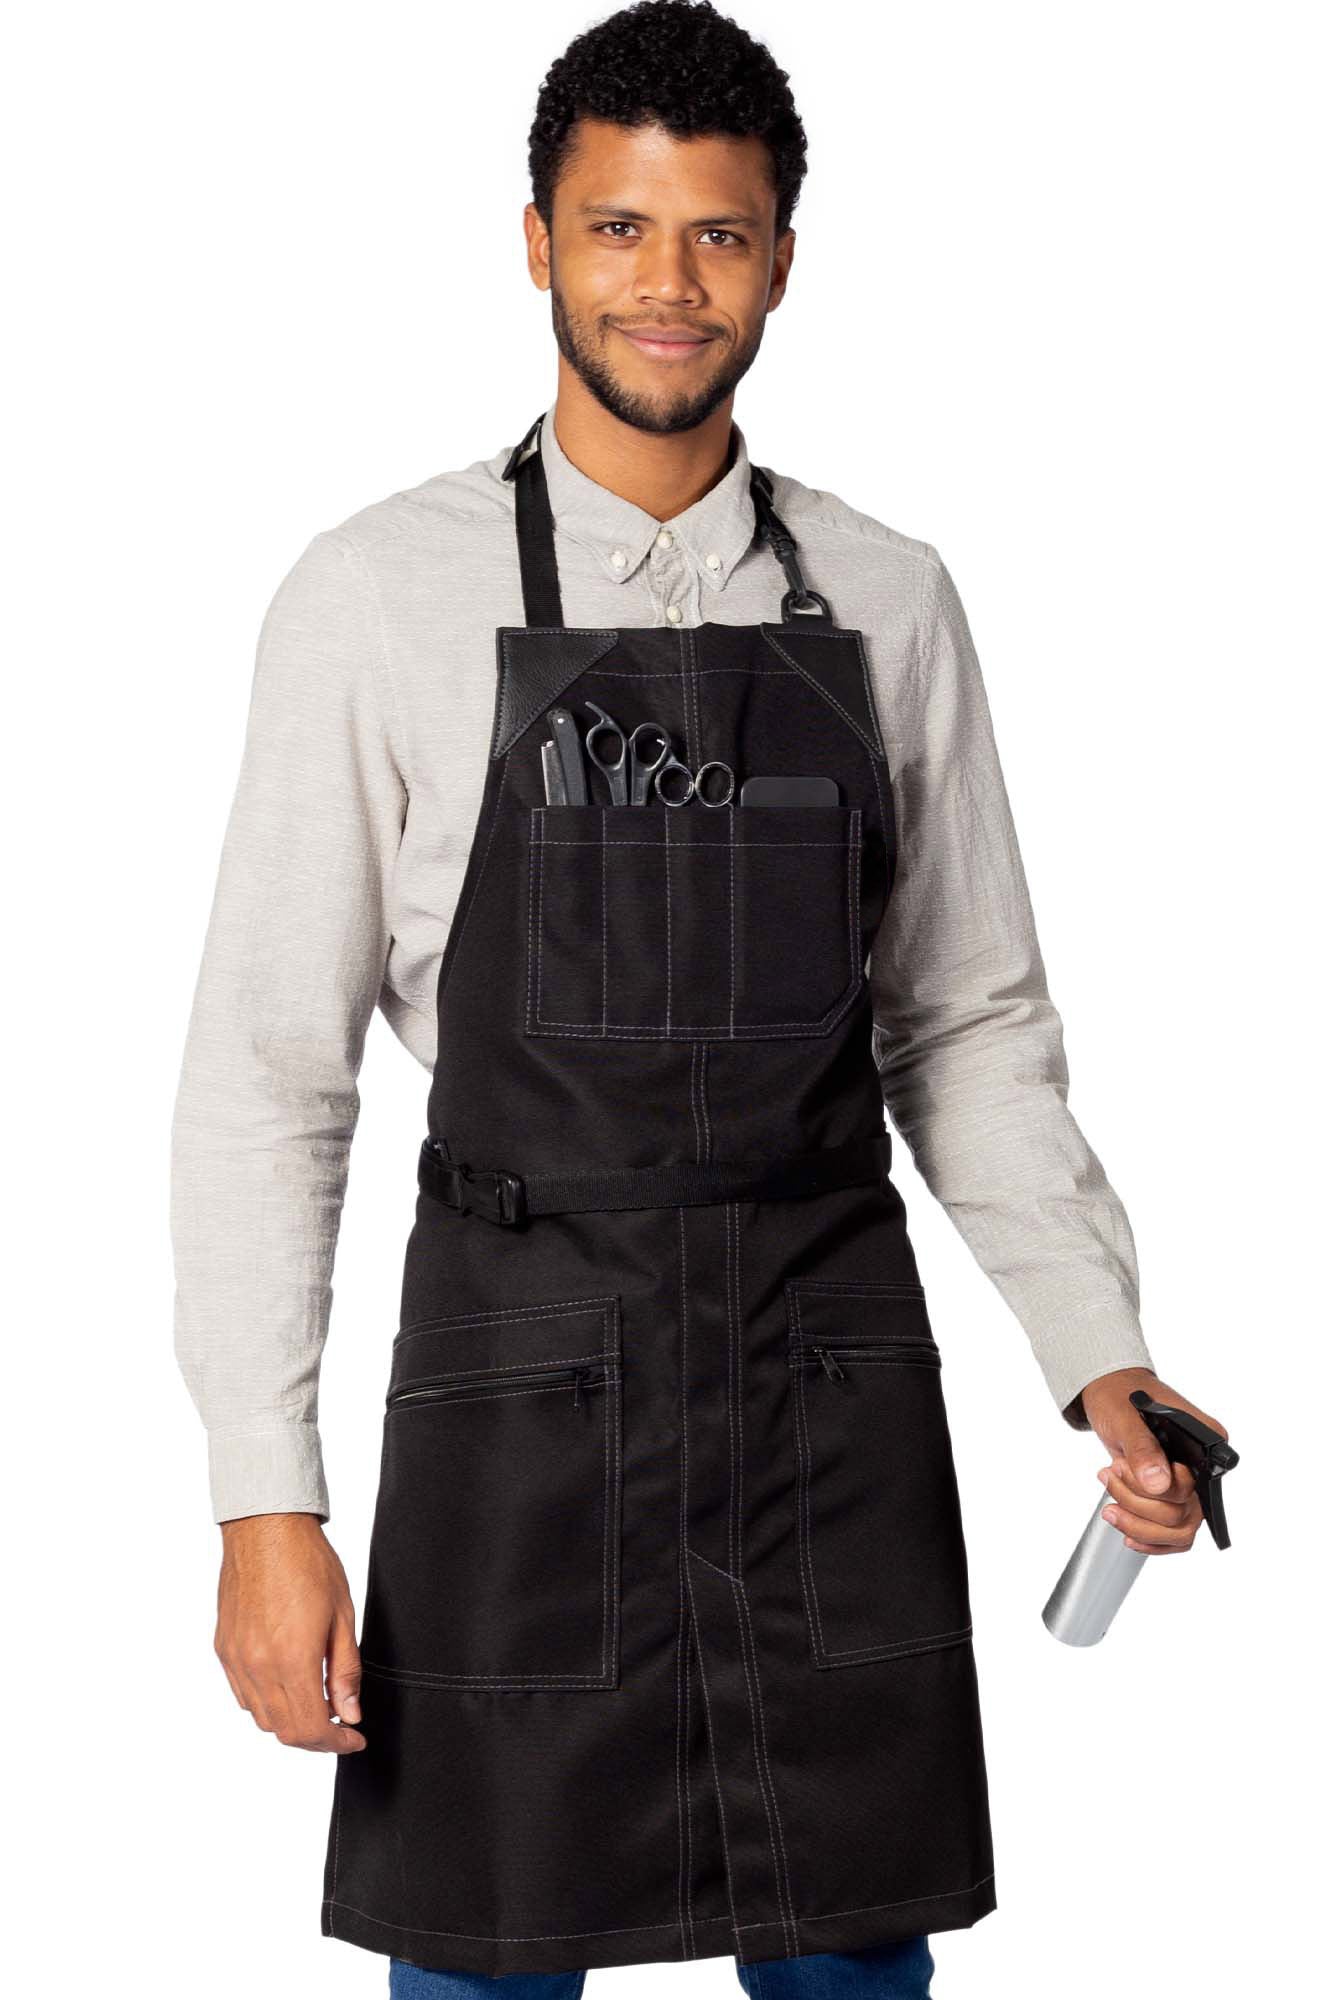 Barber Apron - Water & Chemical Proof, Zip Pocket, Buckle Closure - Hairstylist, Colorist, Salon - Under NY Sky